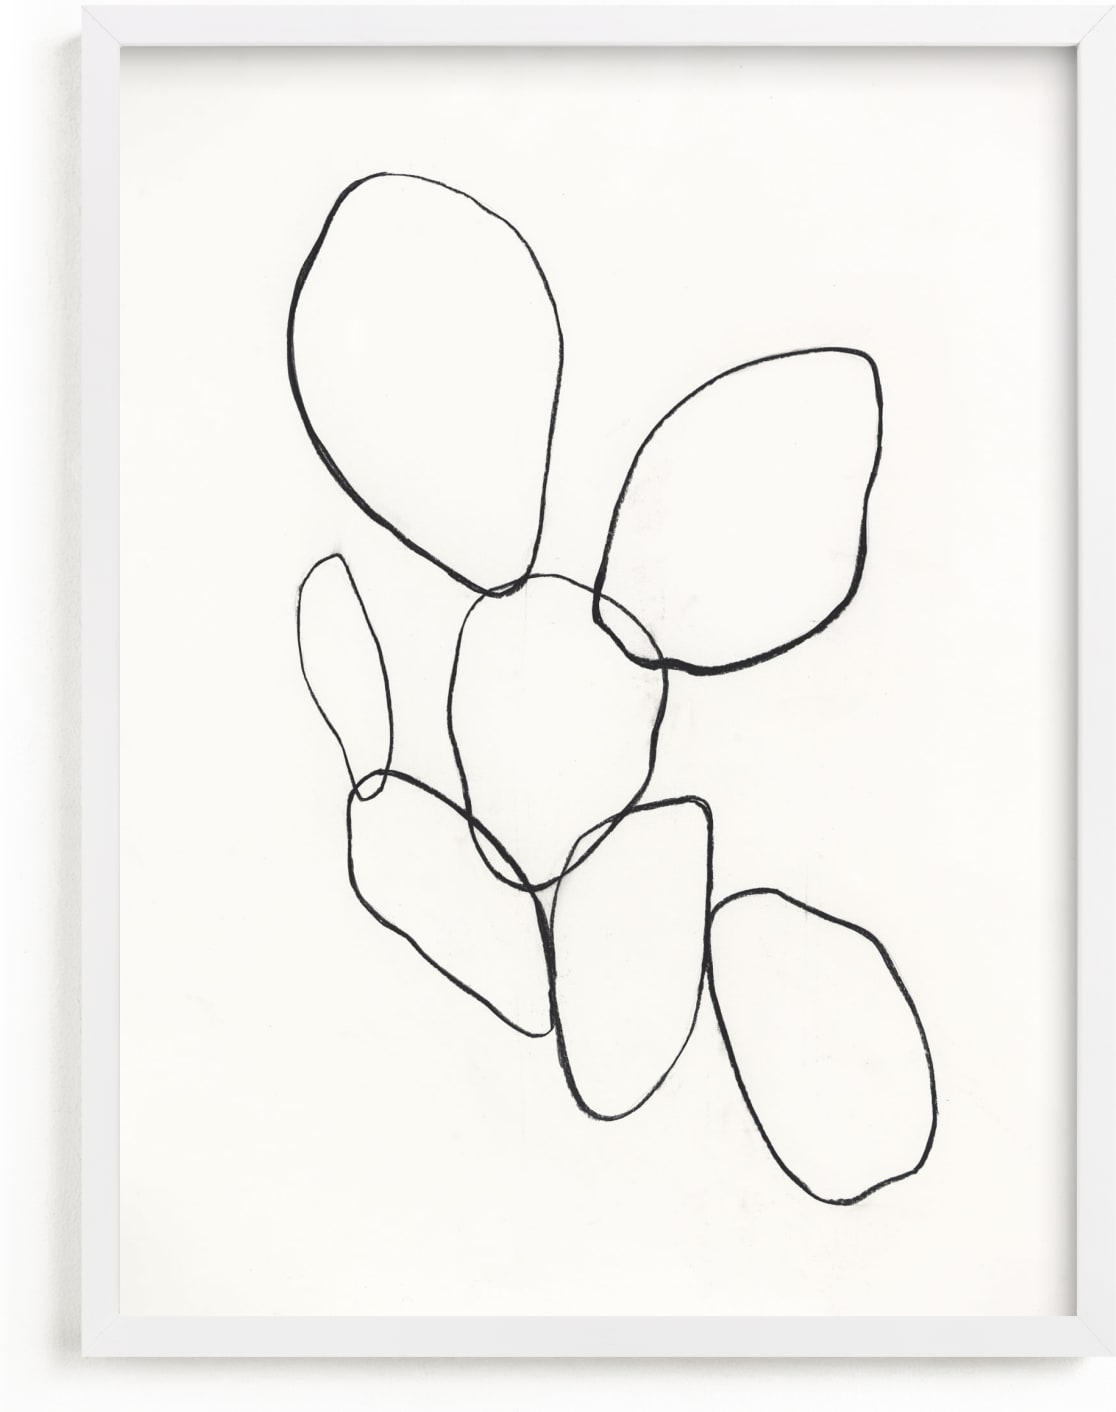 This is a ivory art by Amanda Phelps called Cactus Line Drawing.